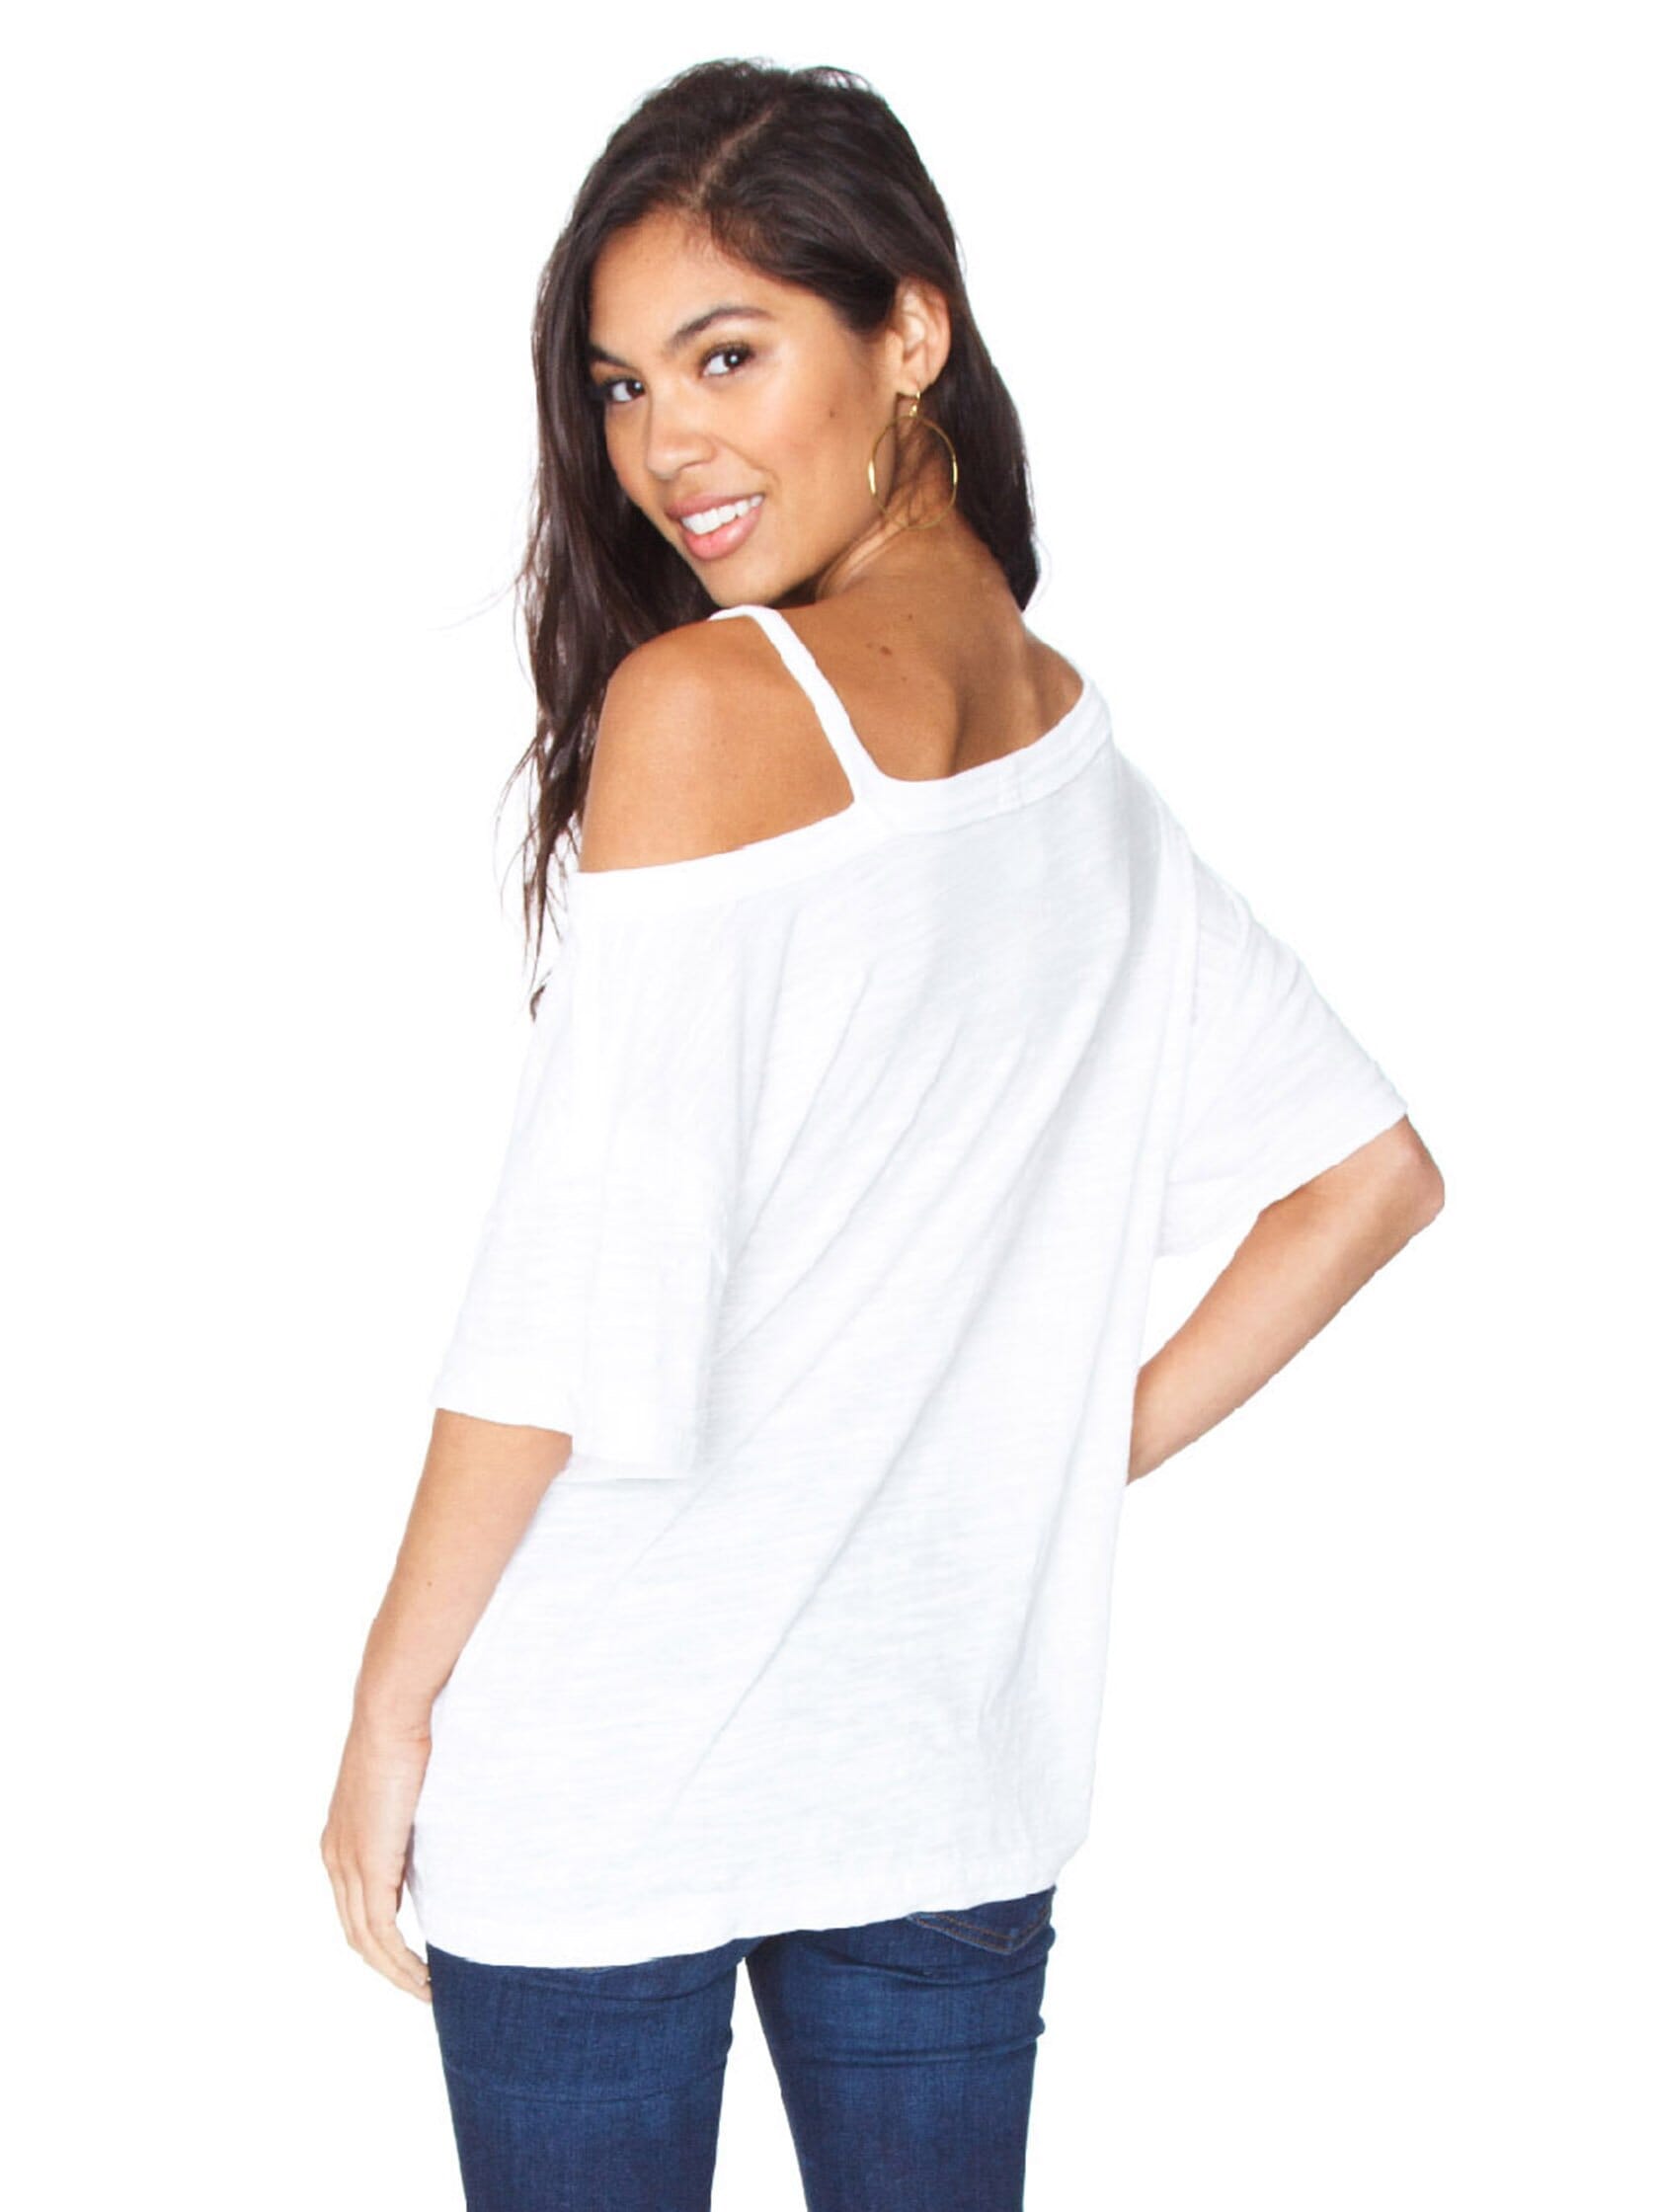 Free People Alex Tee in White